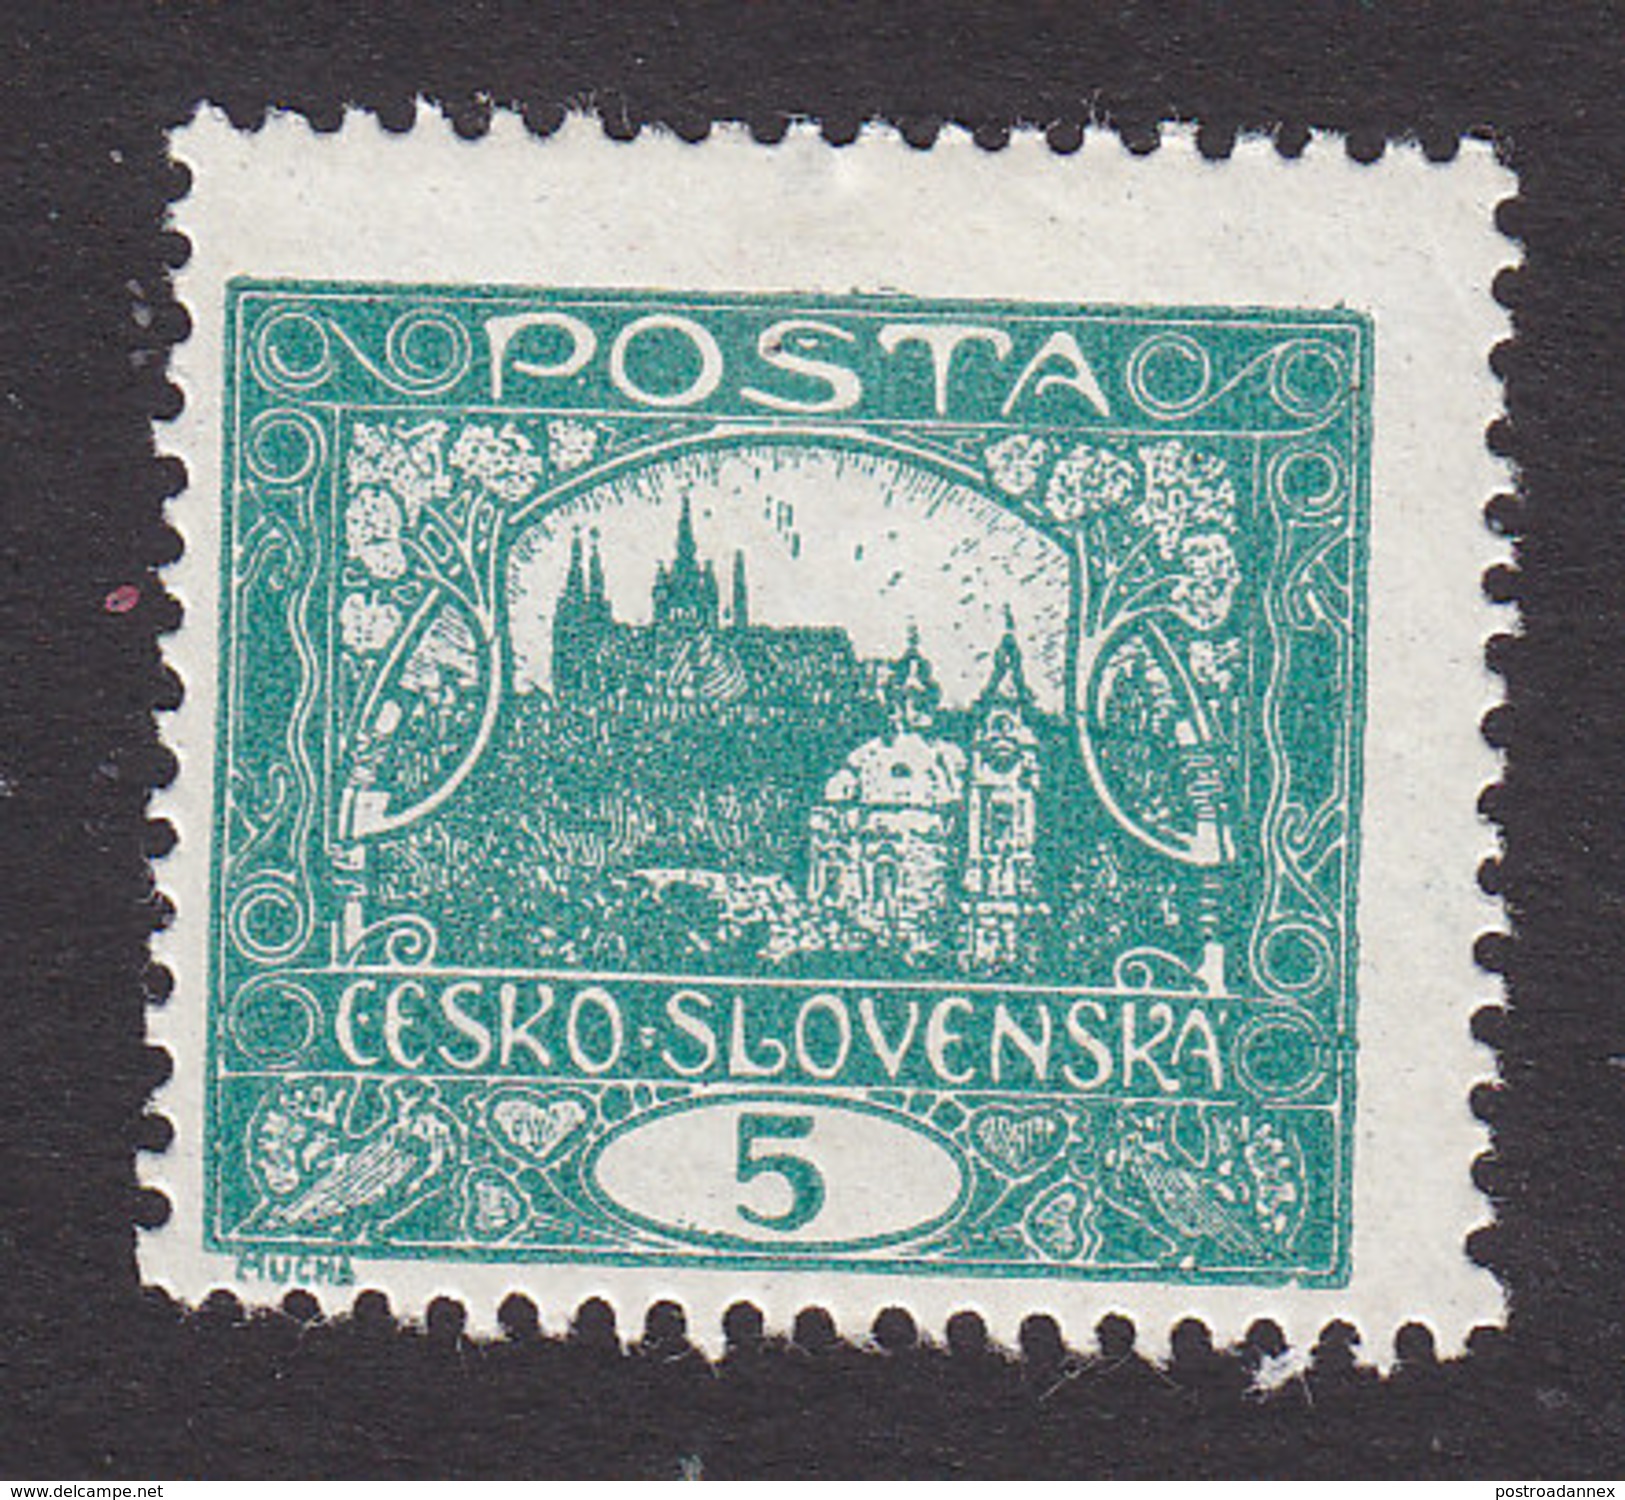 Czechoslovakia, Scott #42a, Mint Hinged, Hradcany At Prague, Issued 1919 - Unused Stamps